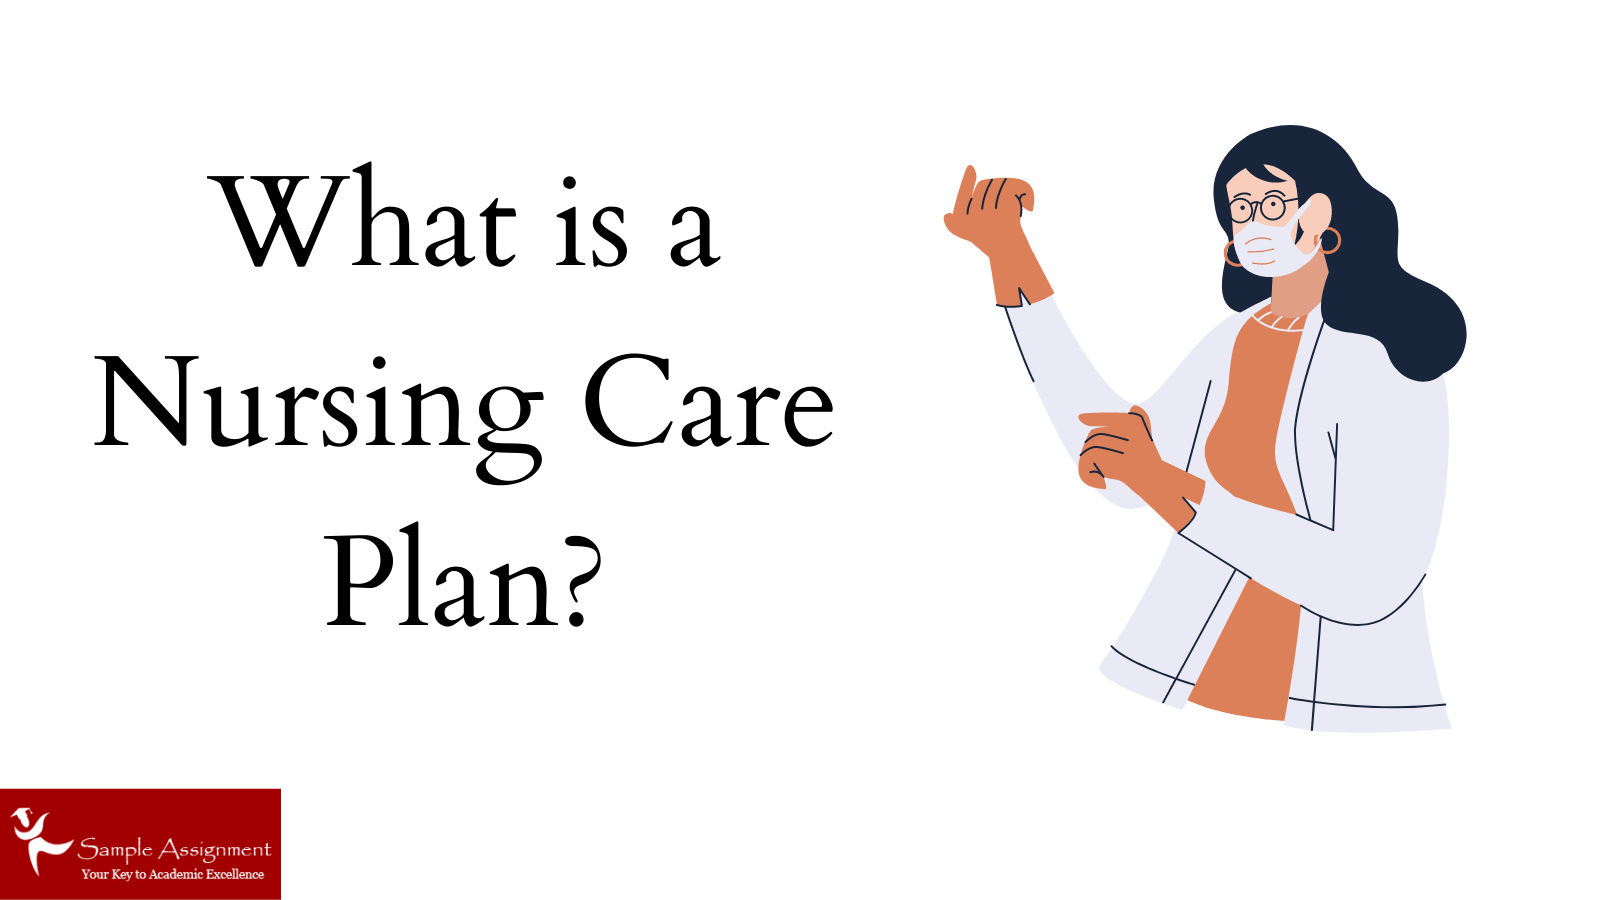 What is a Nursing Care Plan?